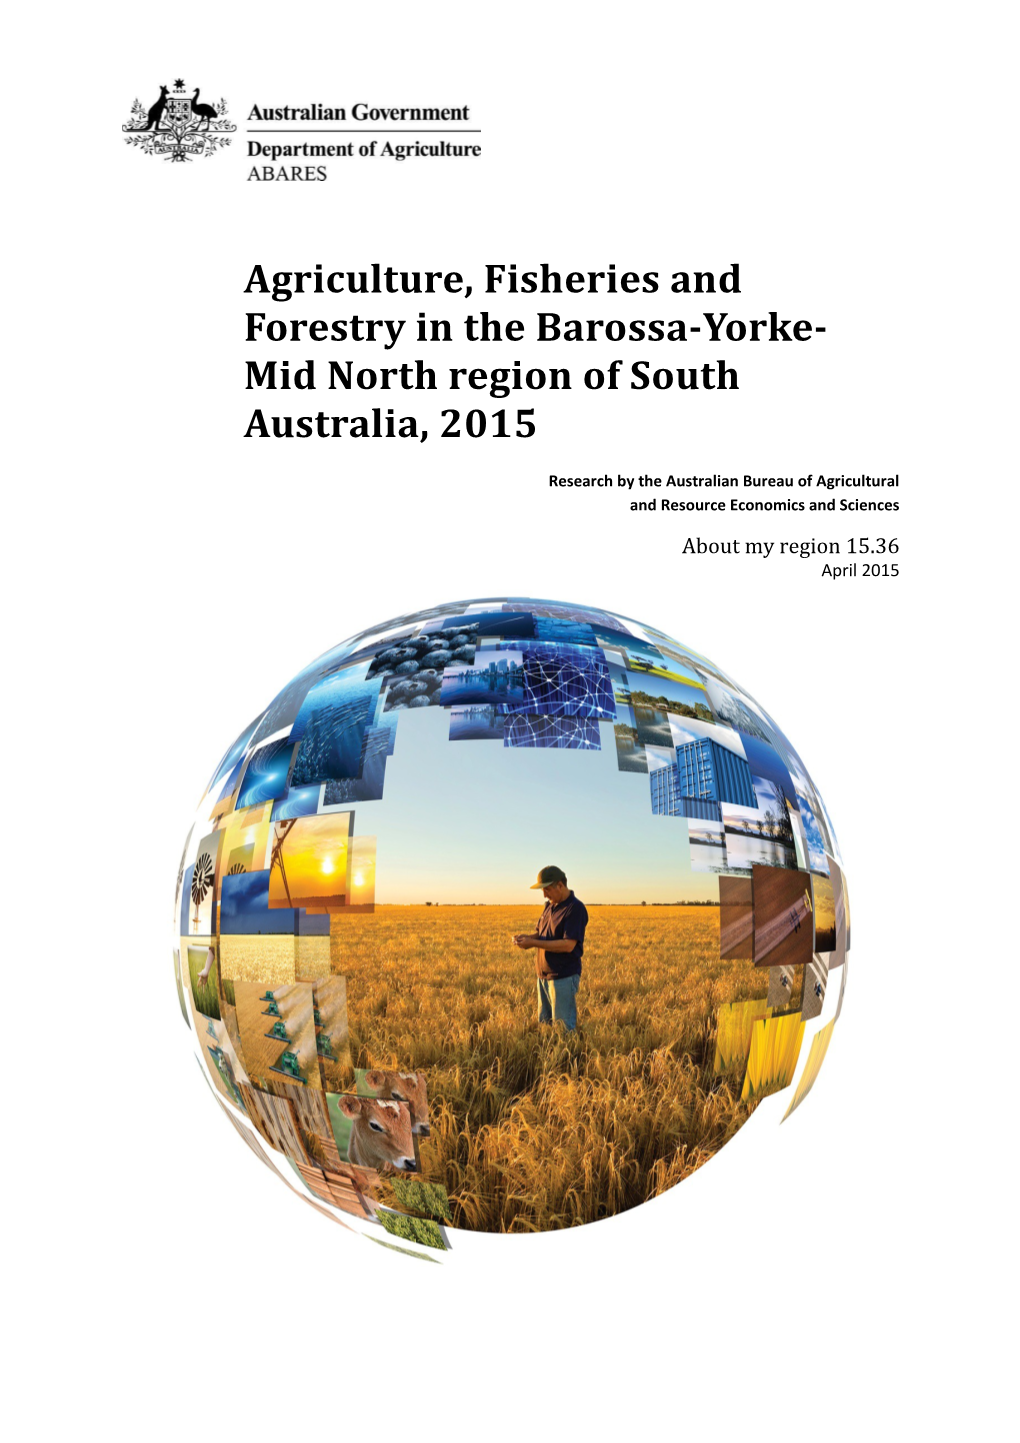 Agriculture, Fisheries and Forestry in the Barossa-Yorke-Mid North Region of South Australia